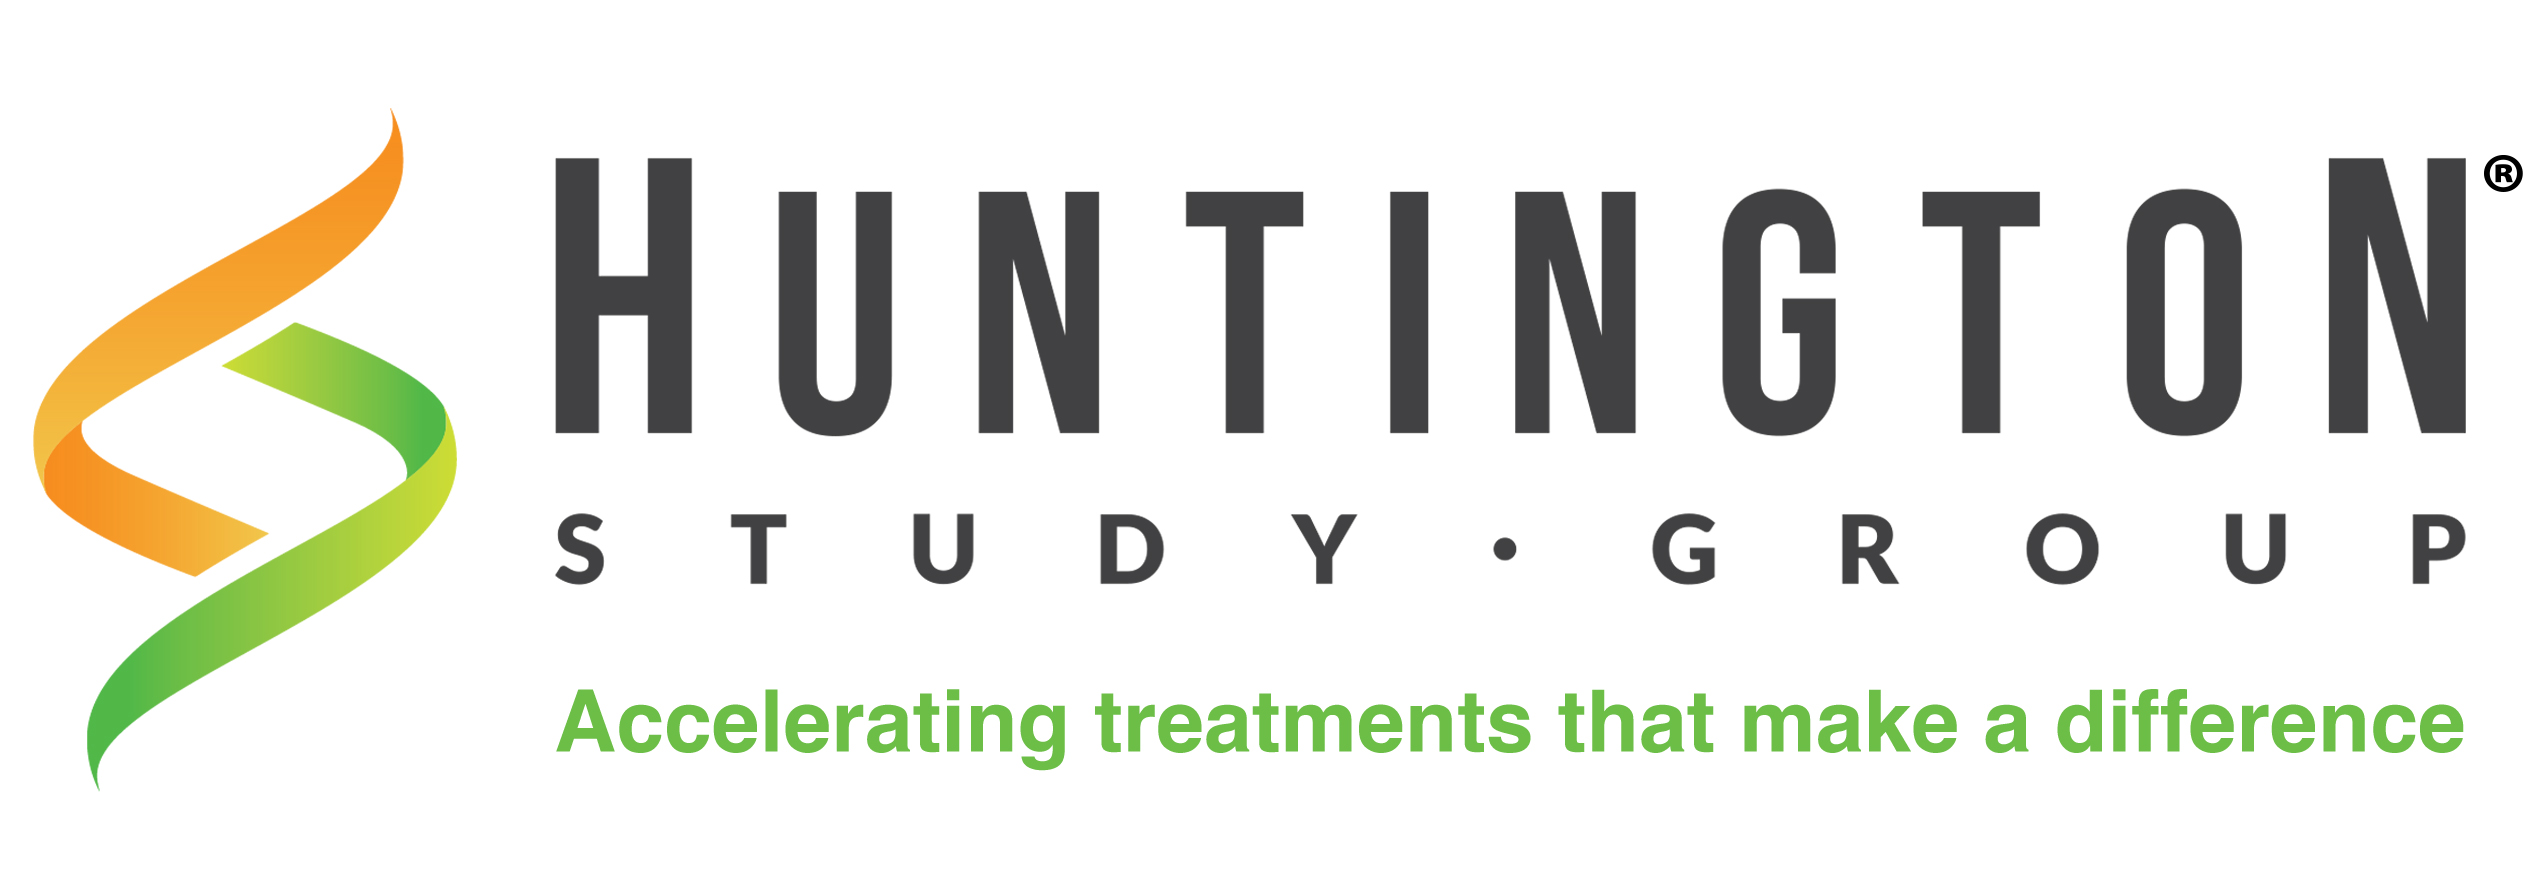 Huntington Study Group Welcomes FDA Approval of New Drug for Chorea in Huntington’s Disease